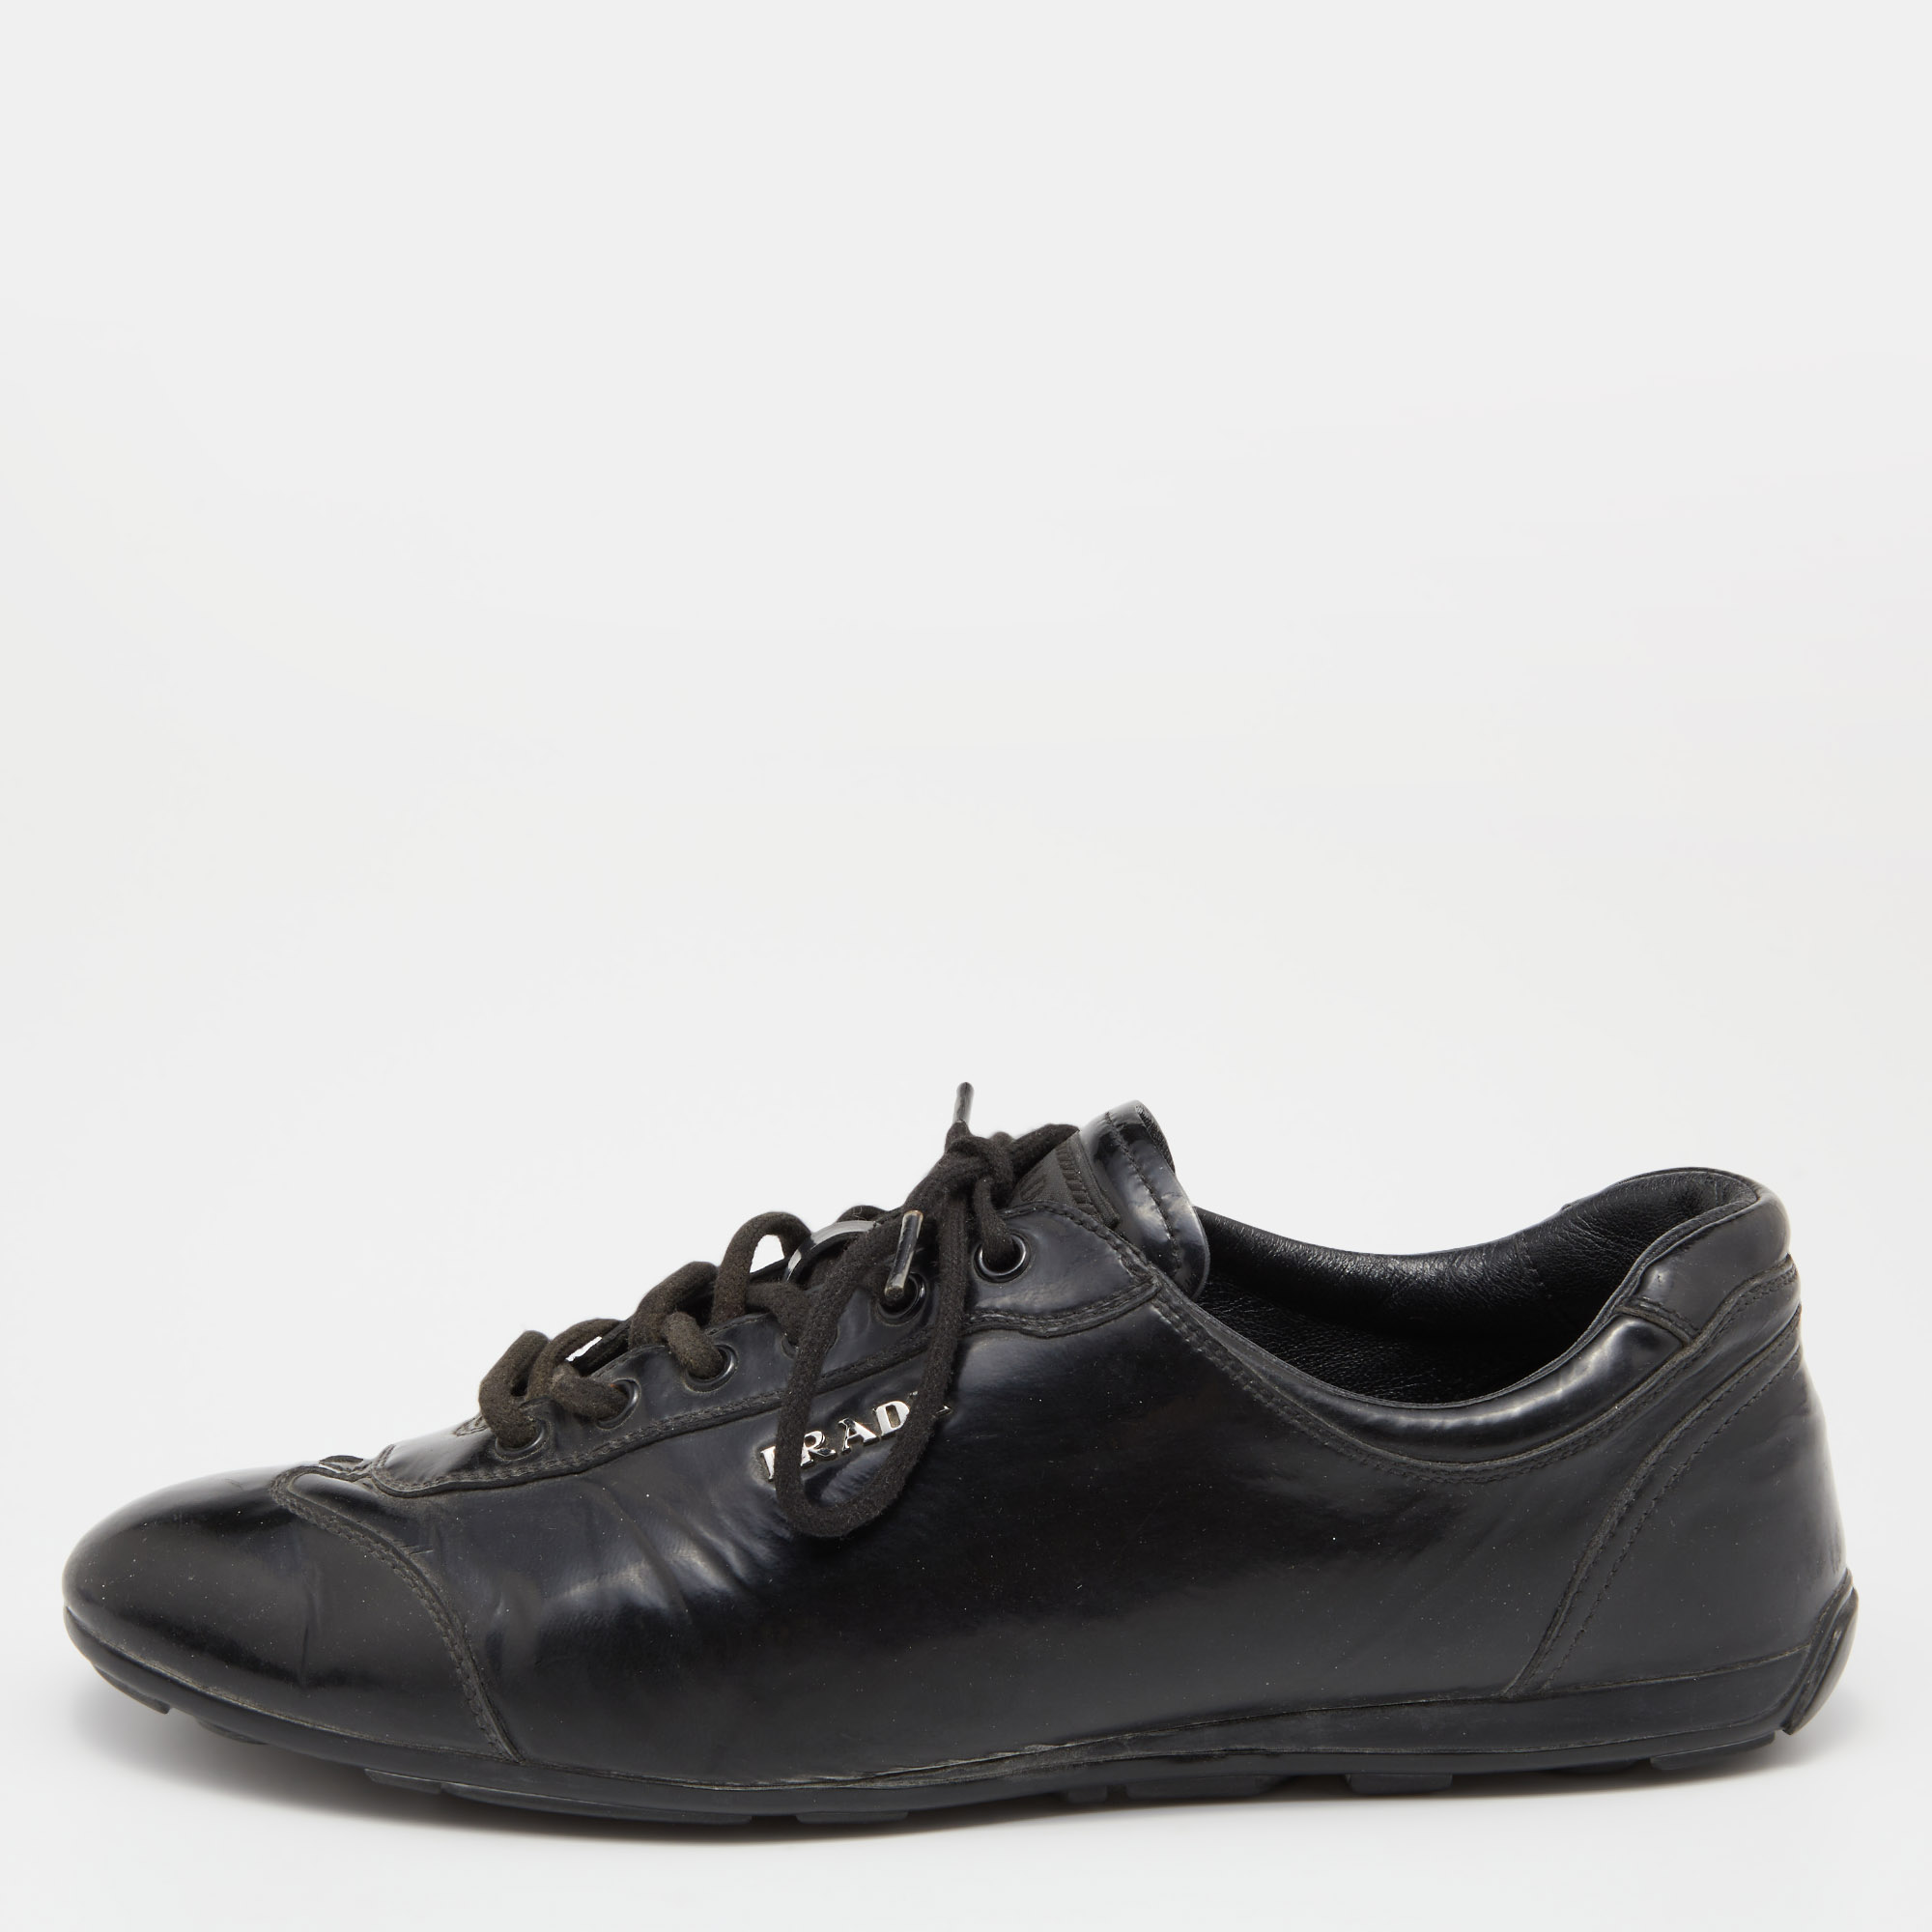 Pre-owned Prada S Black Patent Leather Low Top Sneakers Size 40